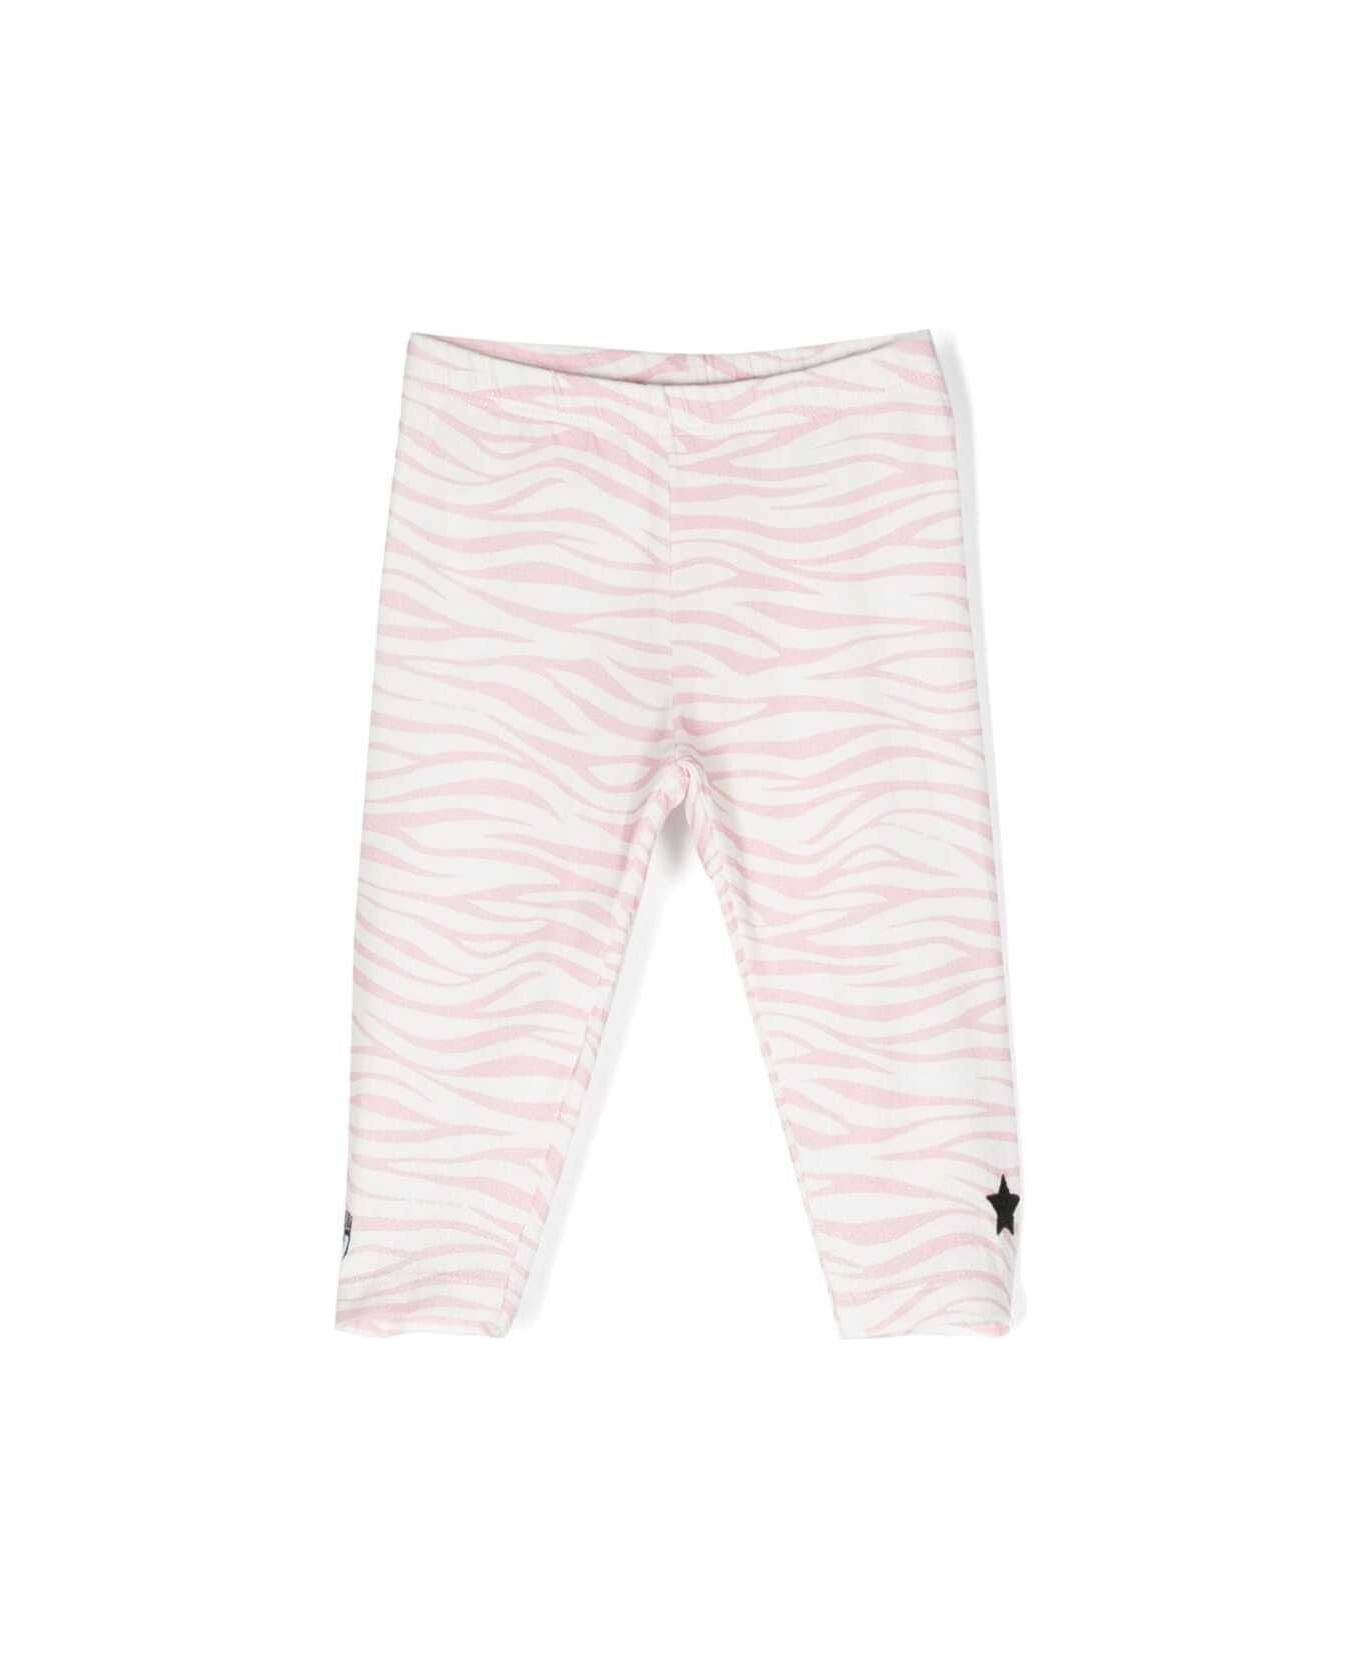 Chiara Ferragni Pink And White Leggings With Zebra And Logo Print In Stretch Cotton Girl - Pink